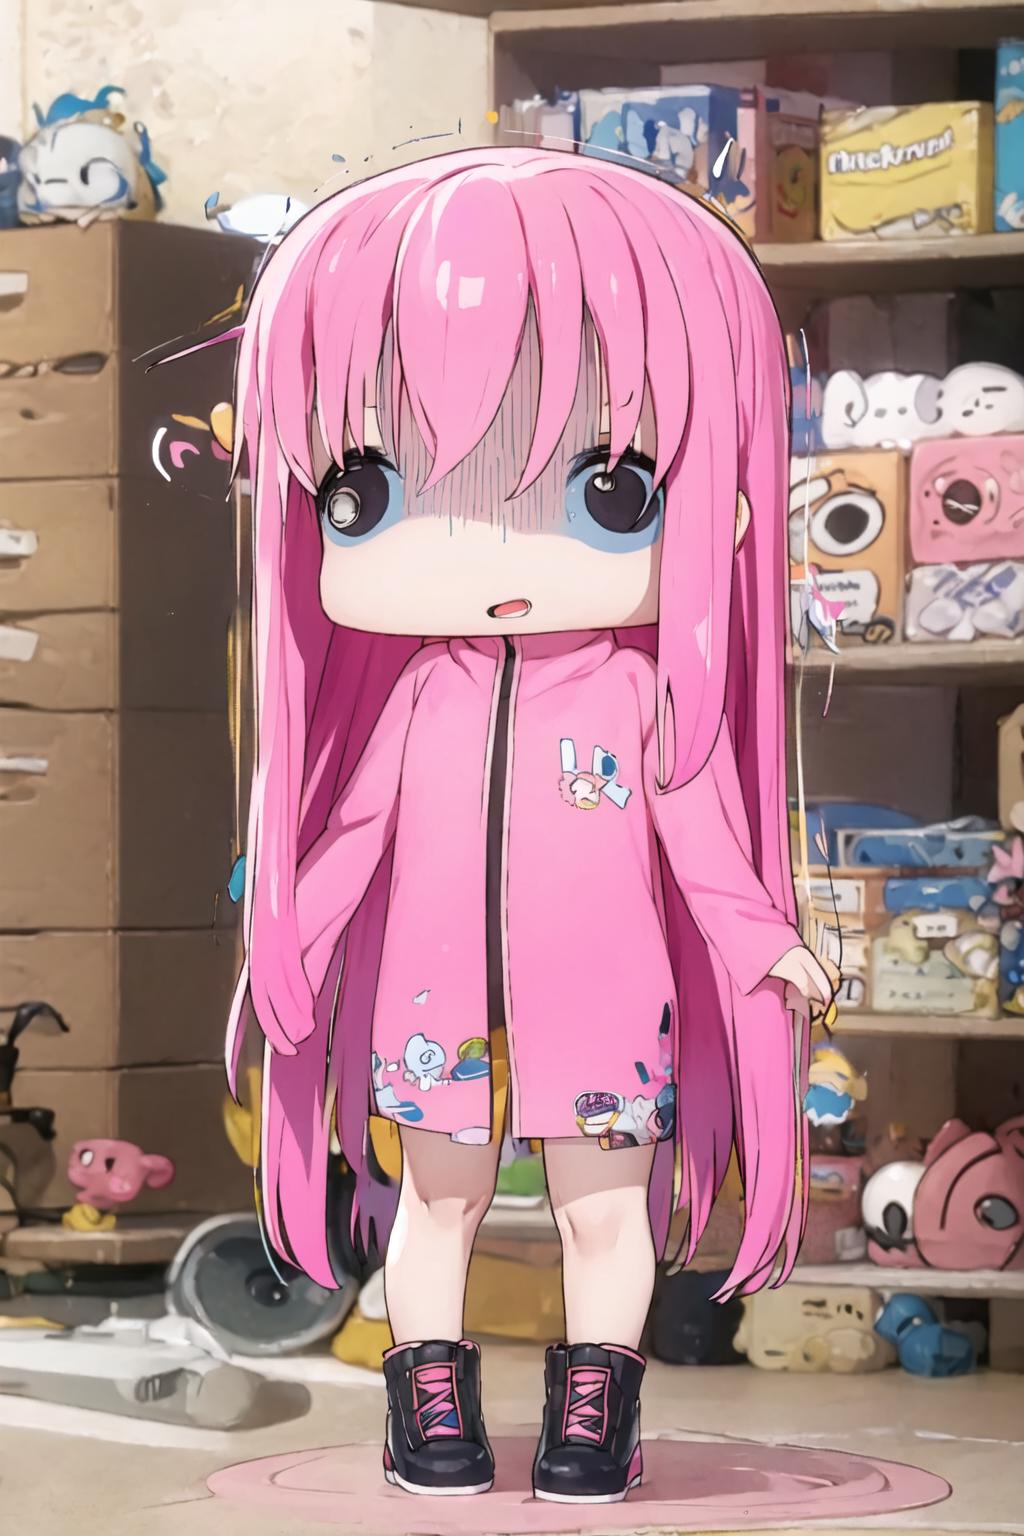 A cartoon girl in a pink jacket standing in front of a shelf.